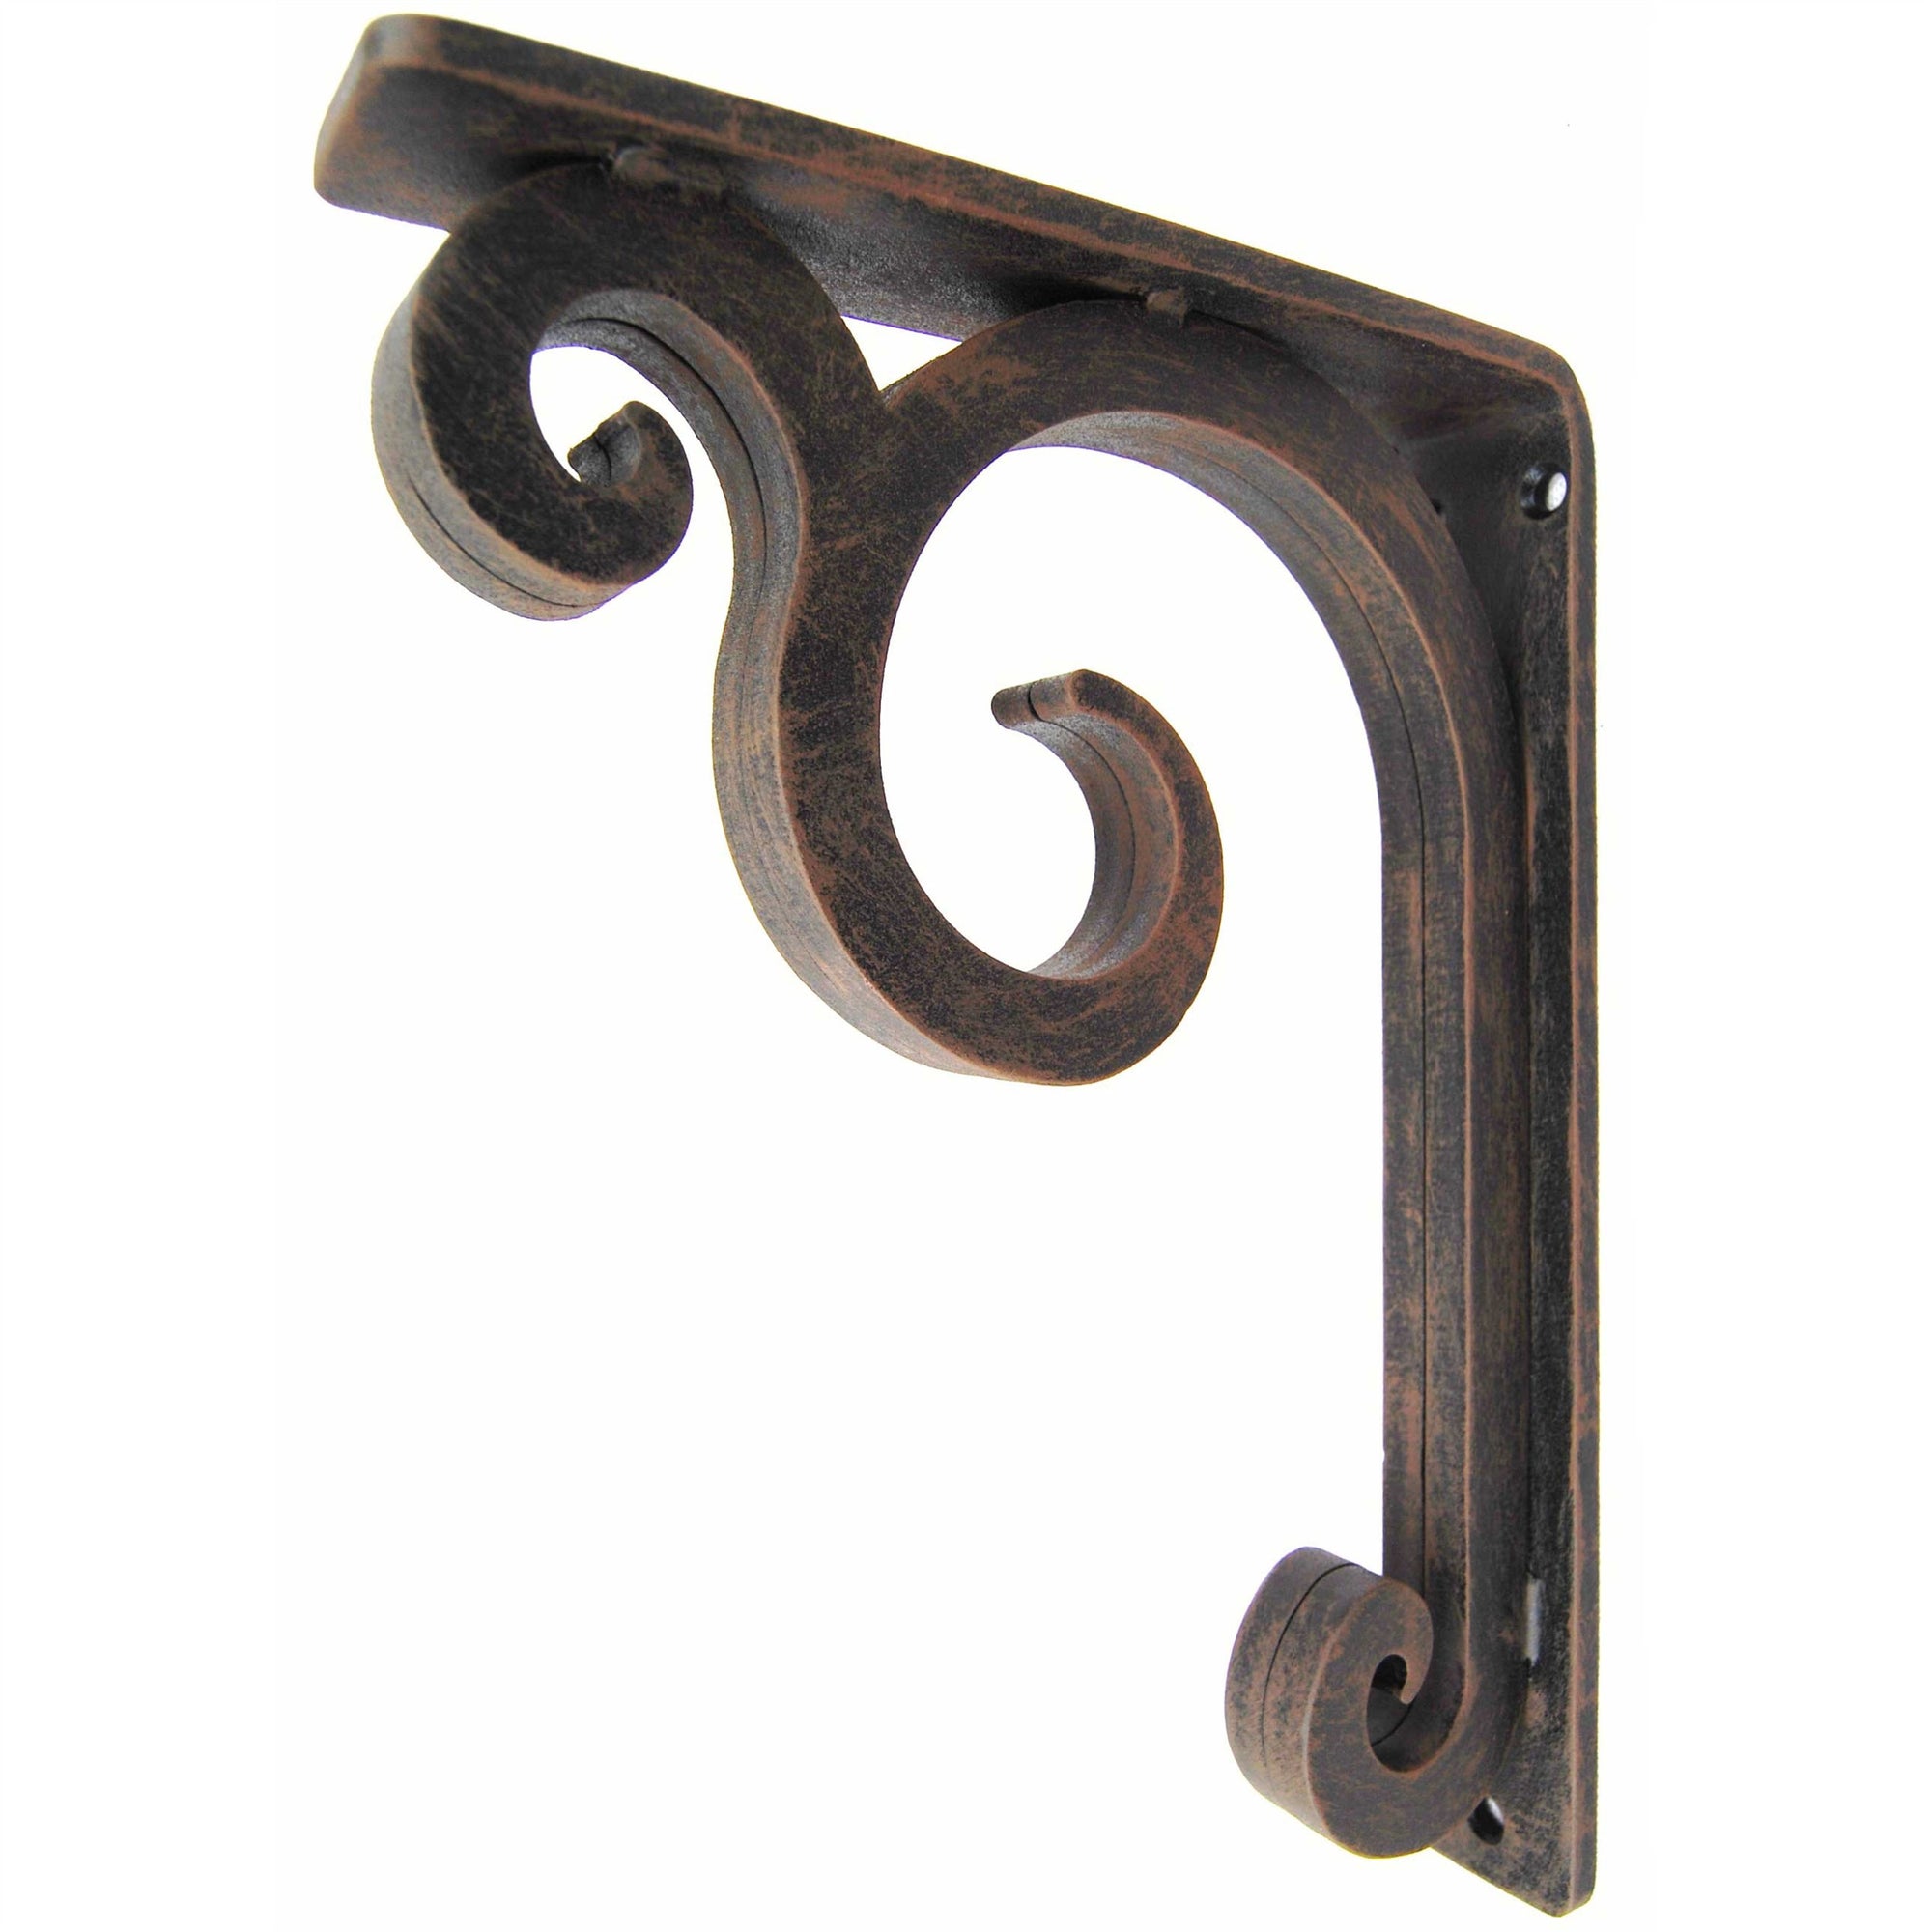 THis is our 1.5inch wide Keaton Iron Corbel with the Old World Finish.